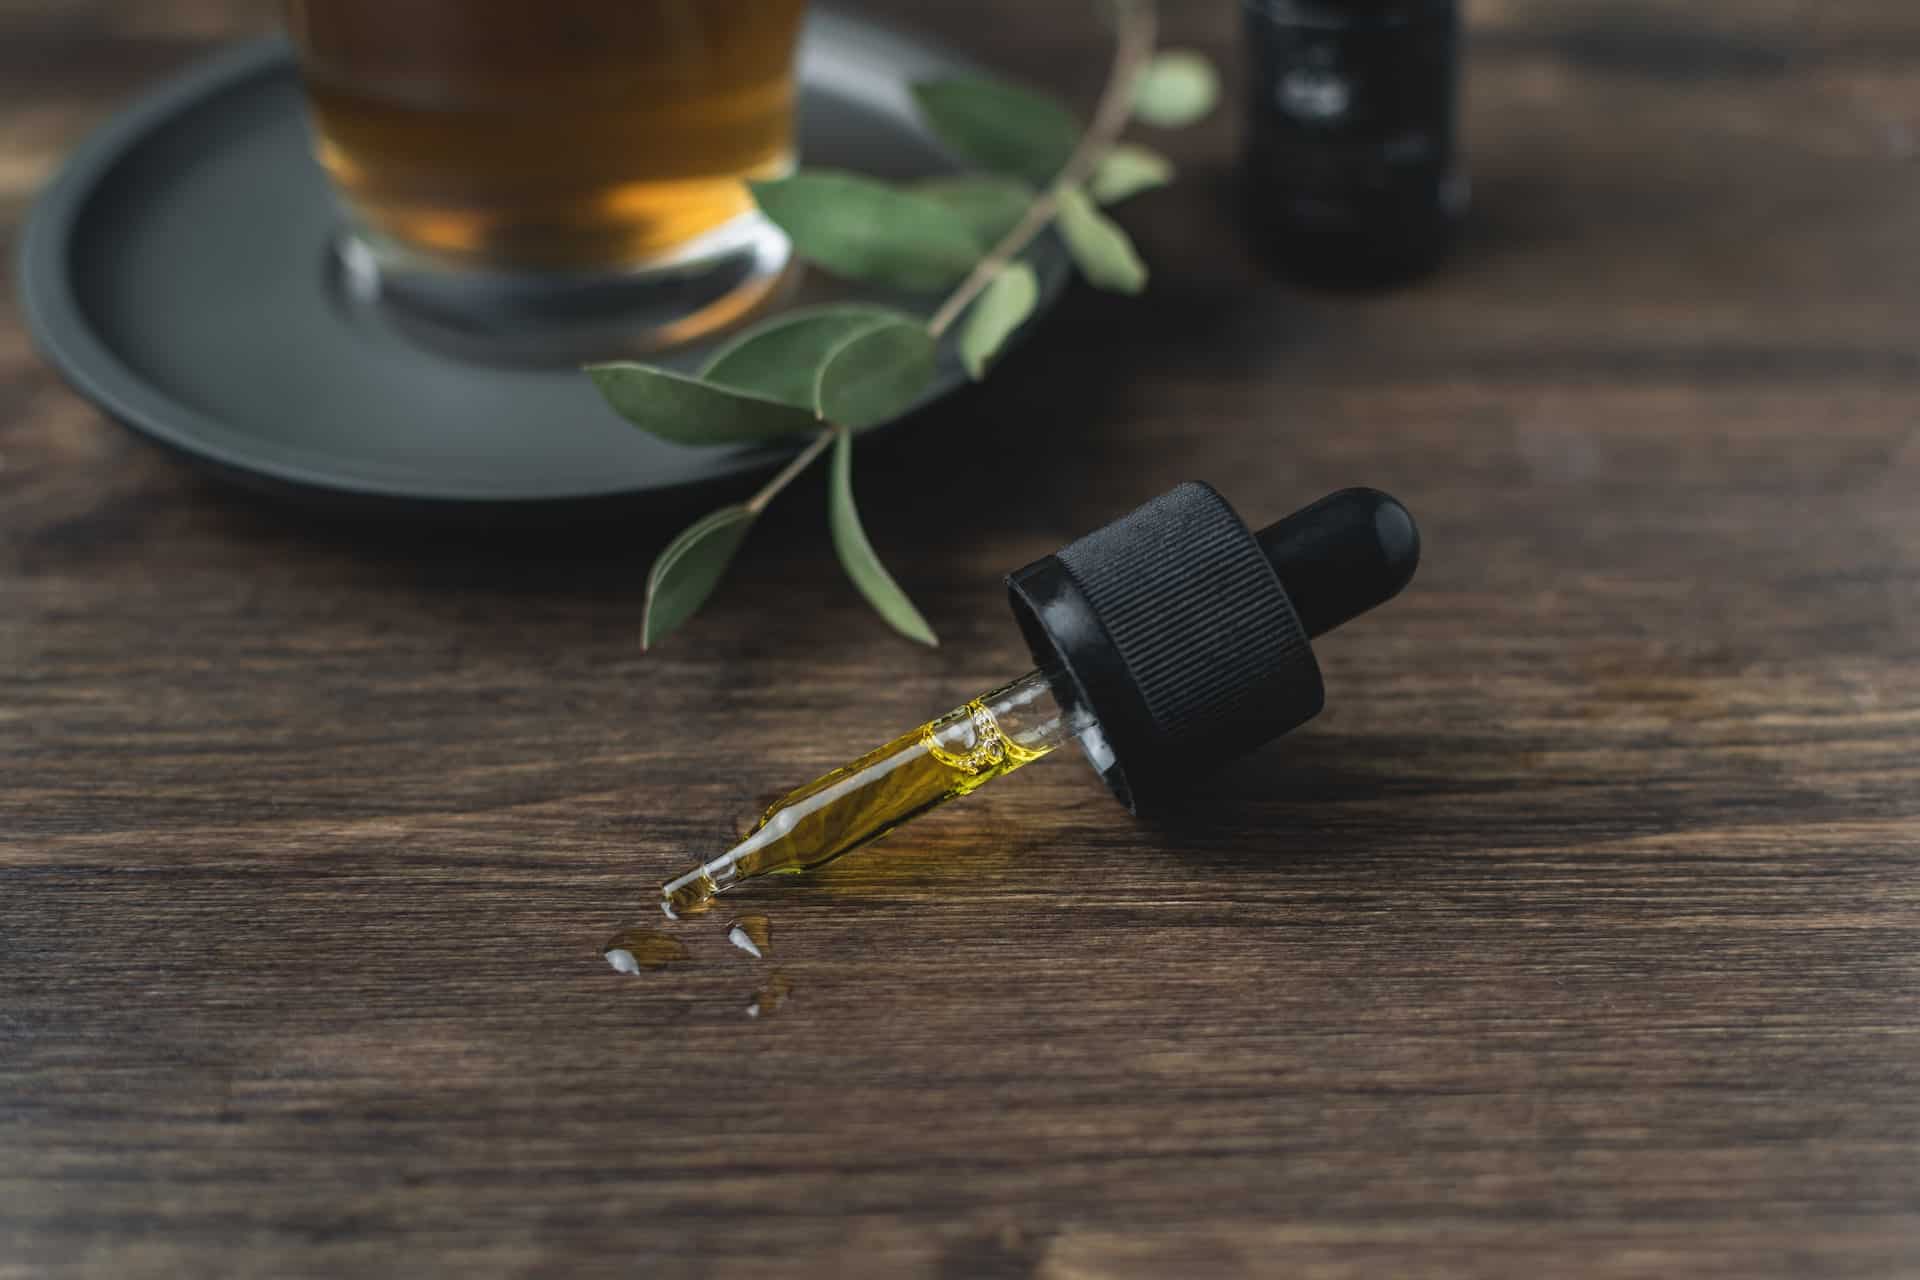 Dropper of CBD oil on a table with a plant stem